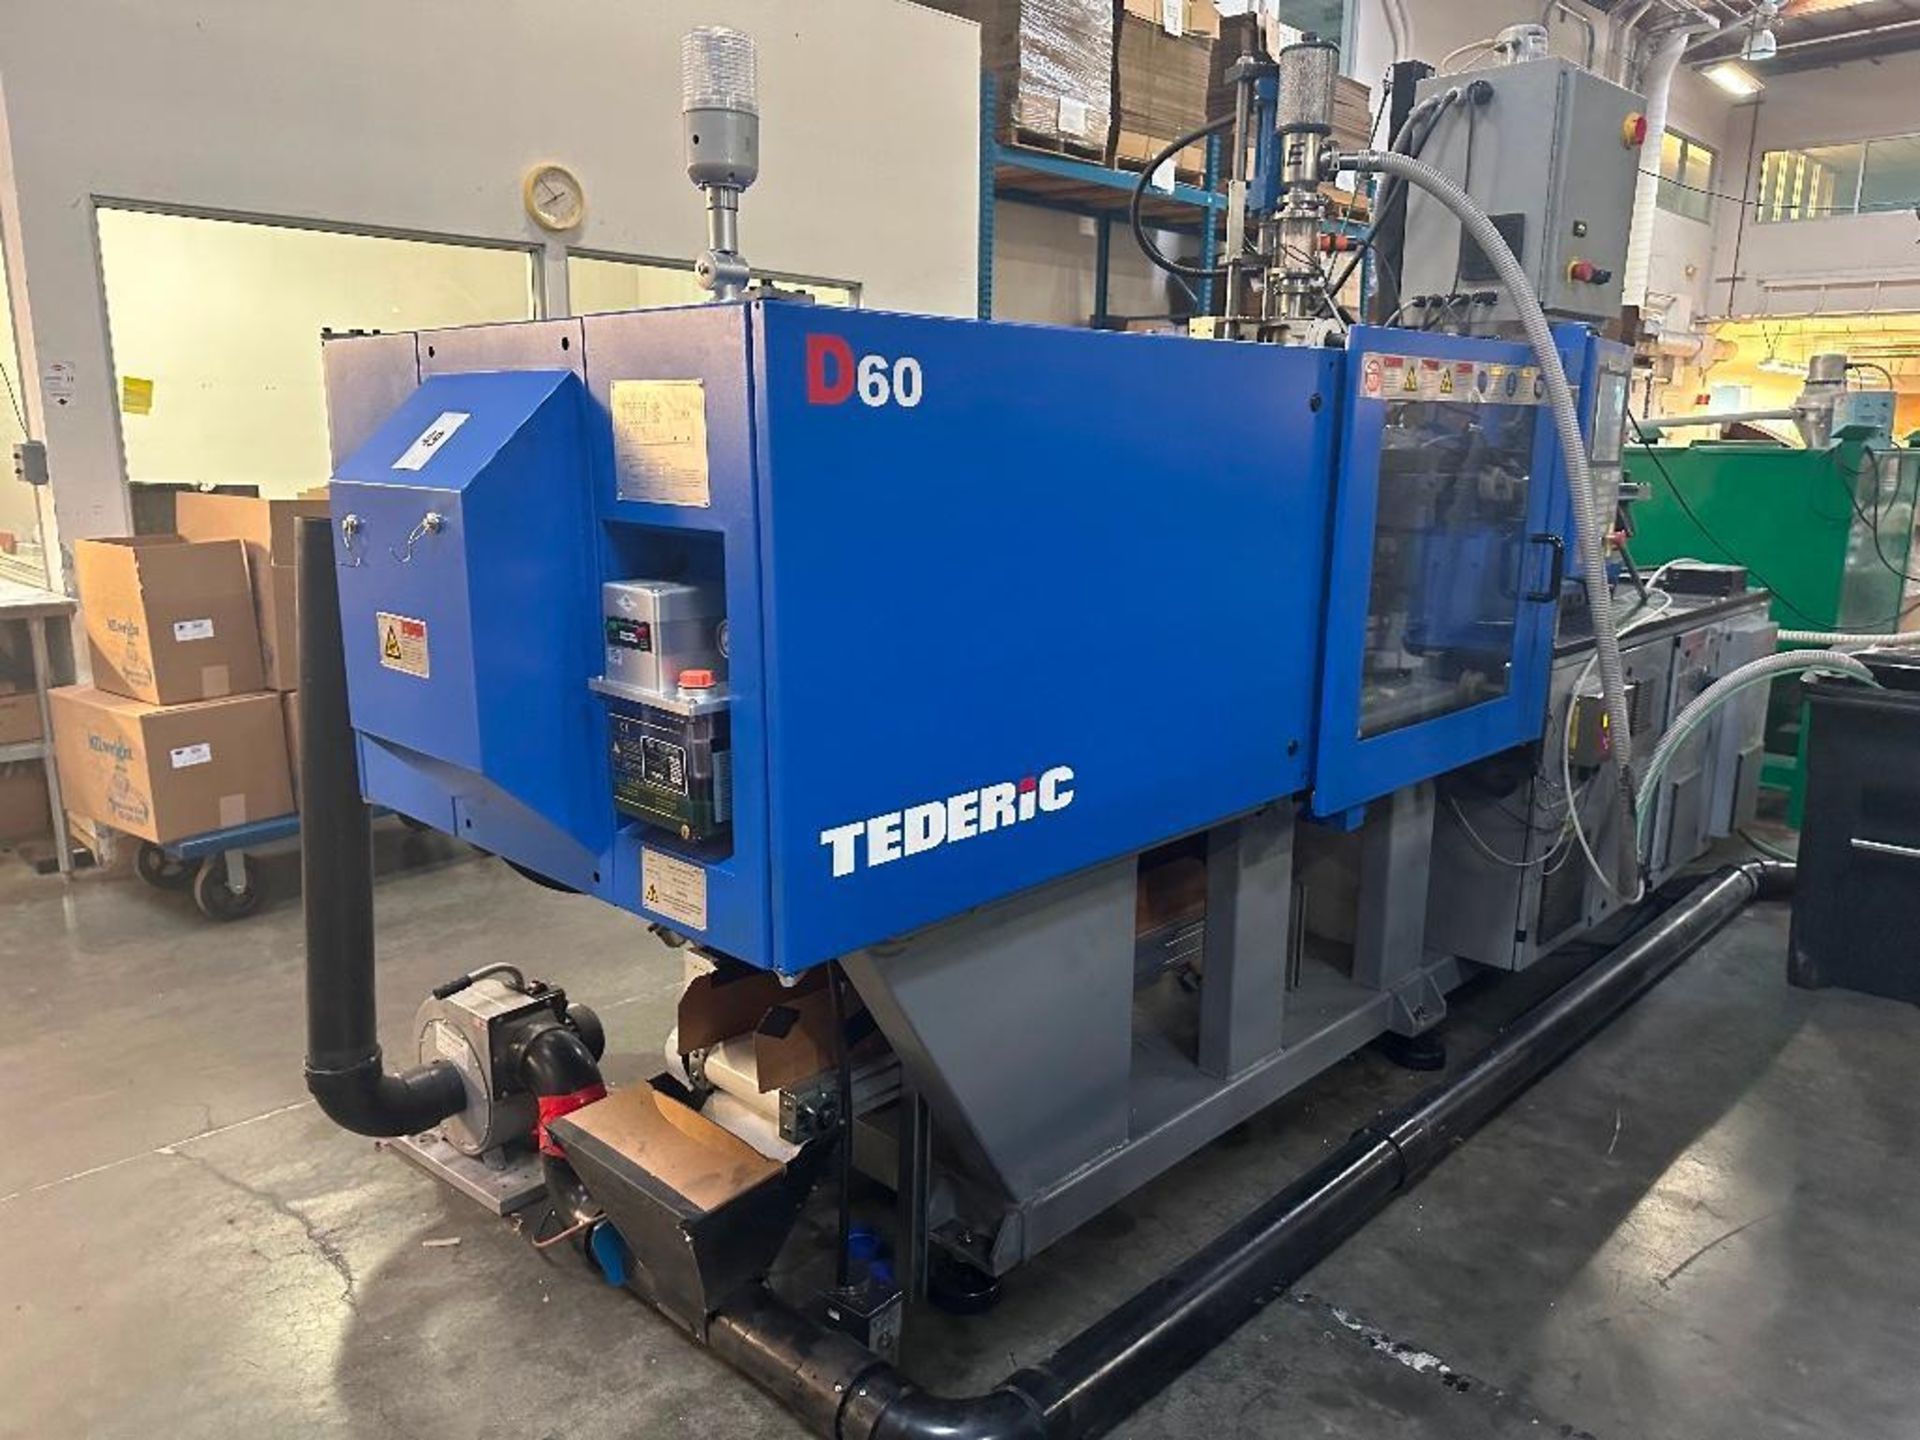 66 Ton Tederic D60 Plastic Injection Molder, Keba 12000 Control, s/n T00800275, New 2020 - Image 2 of 15